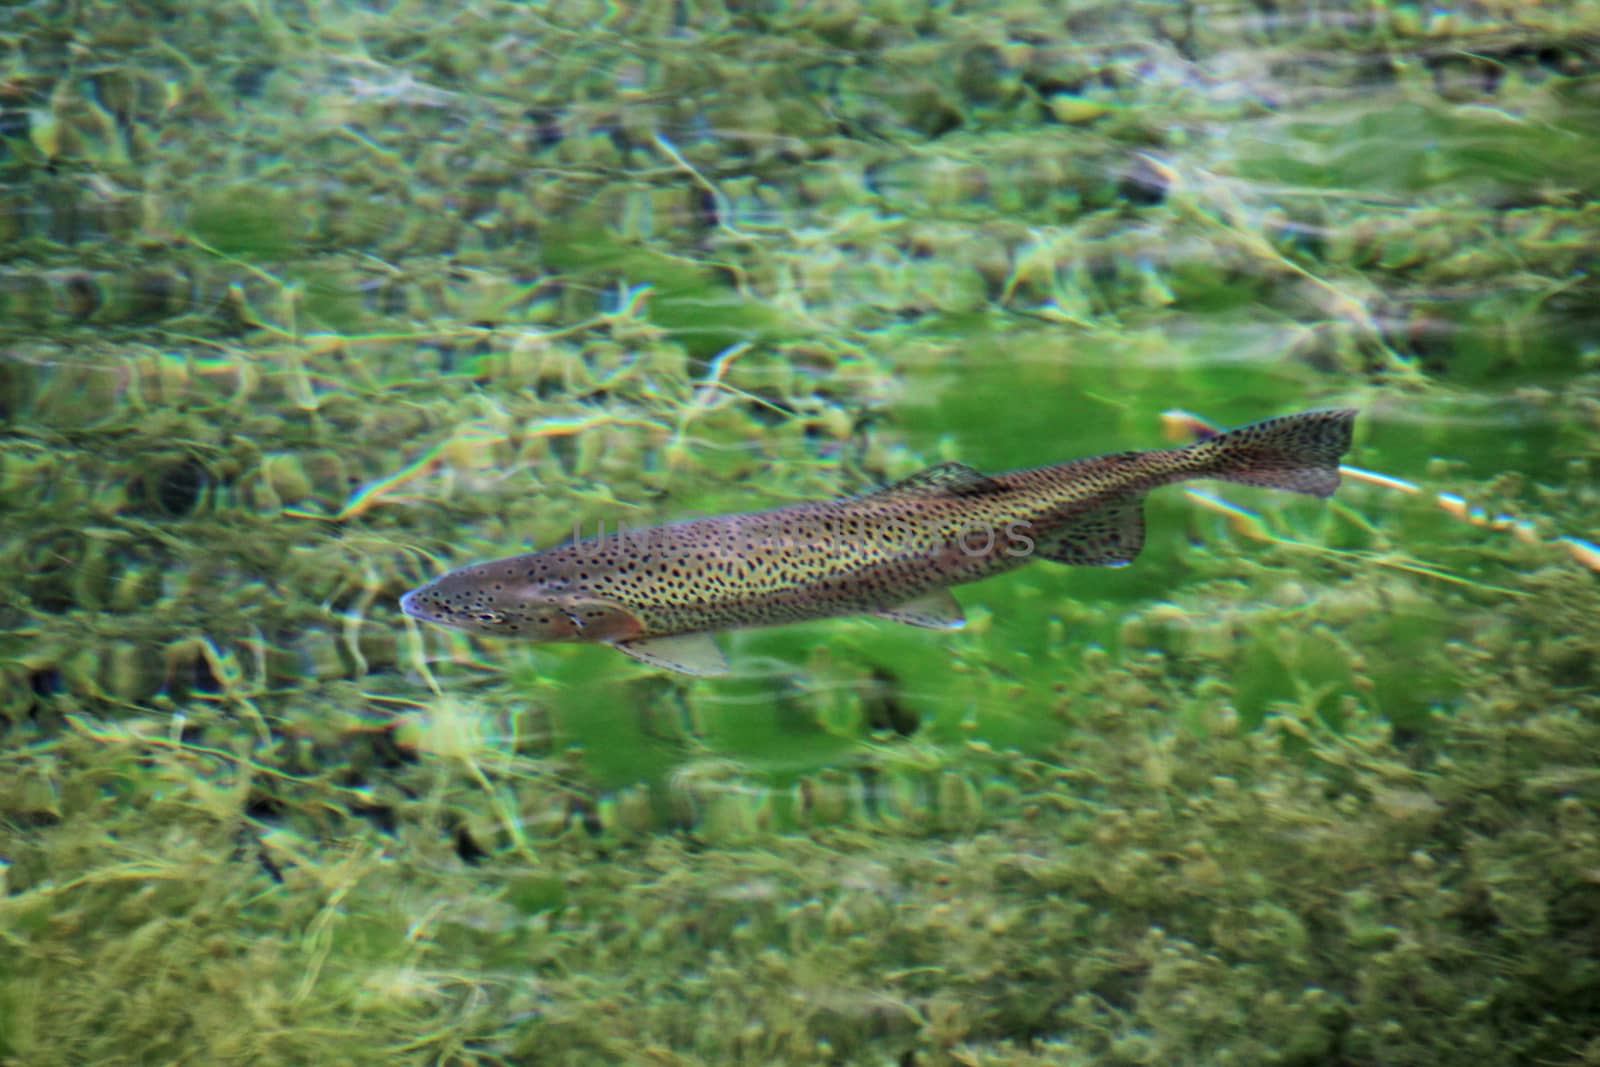 Rainbow trout in the water of the clear lake Laguna Nina Encantada, Patagonia, Argentina, not an underwater photo